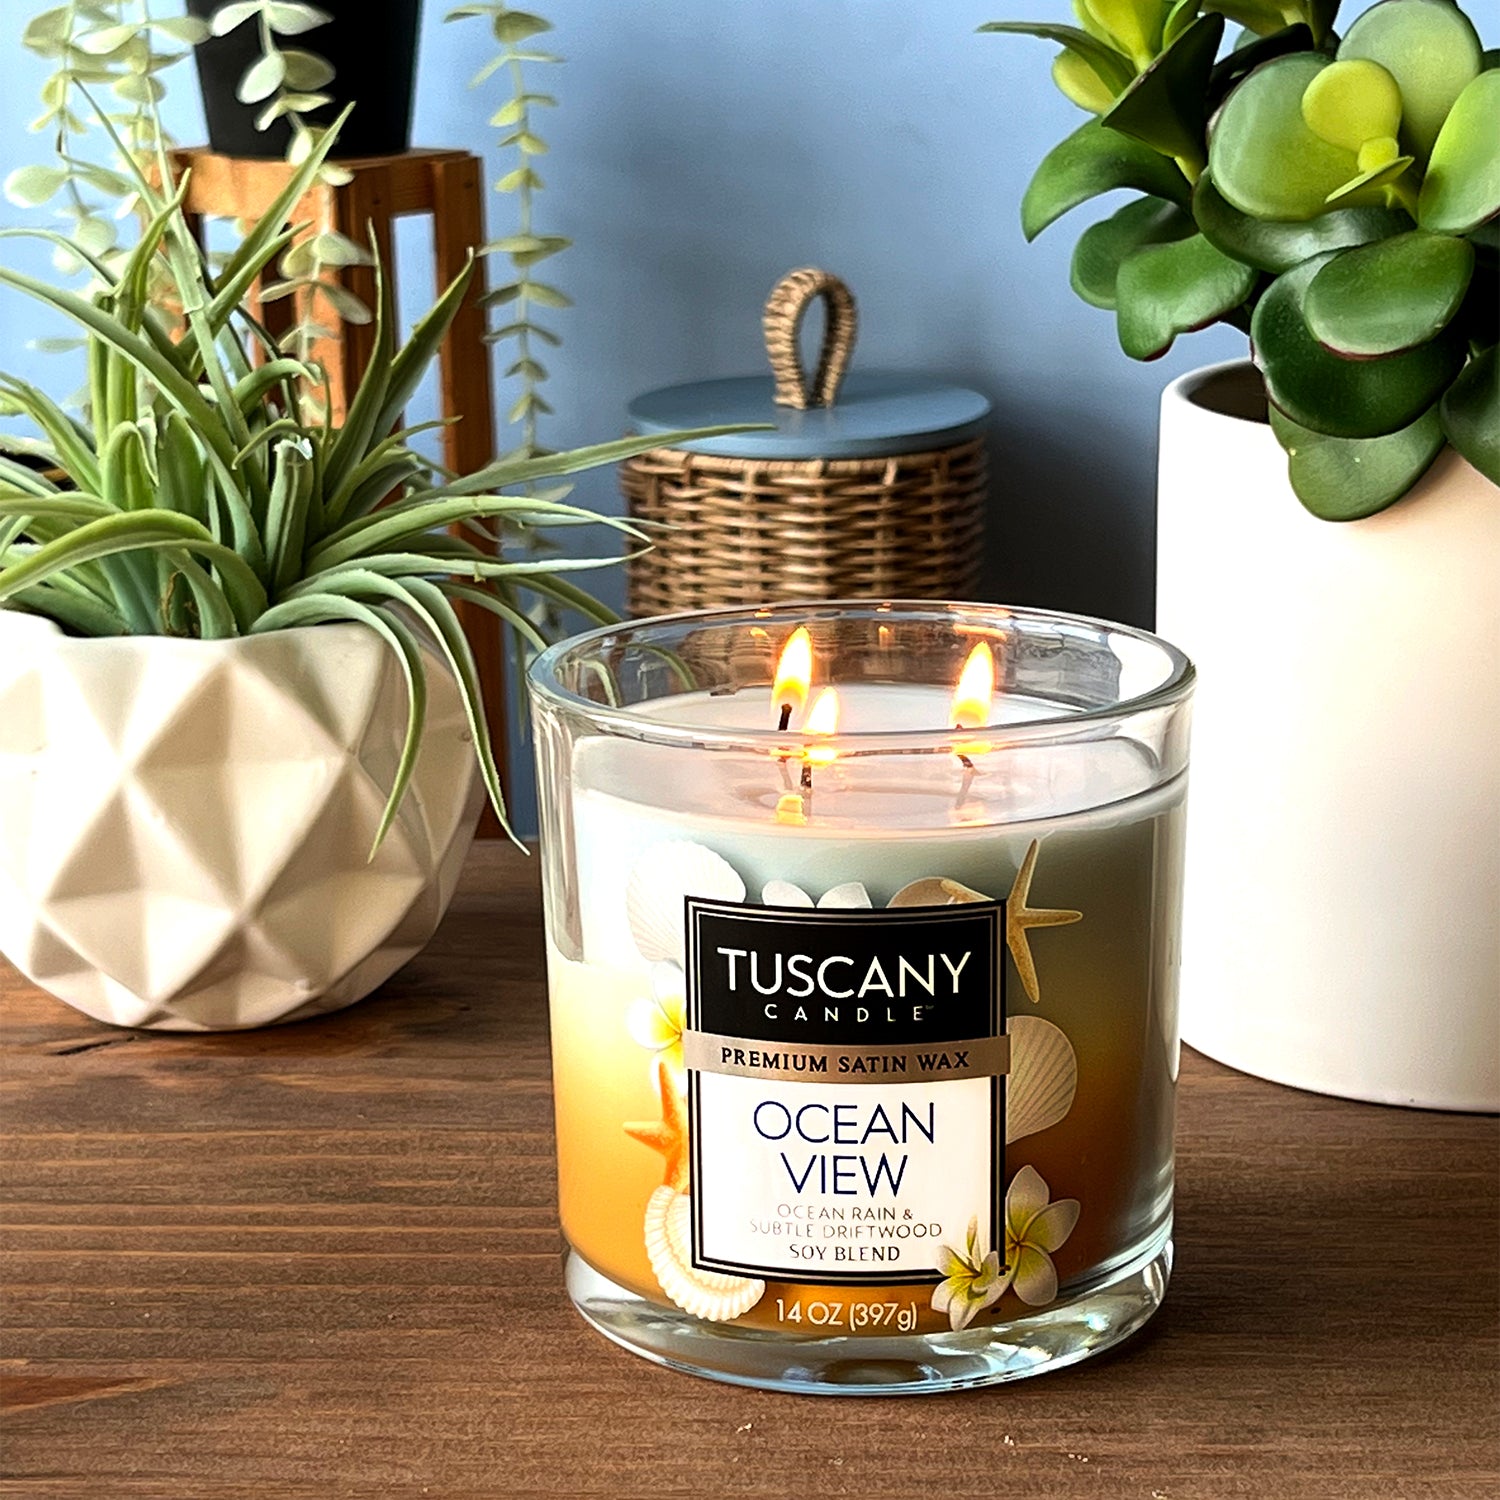 Tuscany Candle® EVD Ocean View Long-Lasting Scented Jar Candle (14 oz) on a driftwood table.